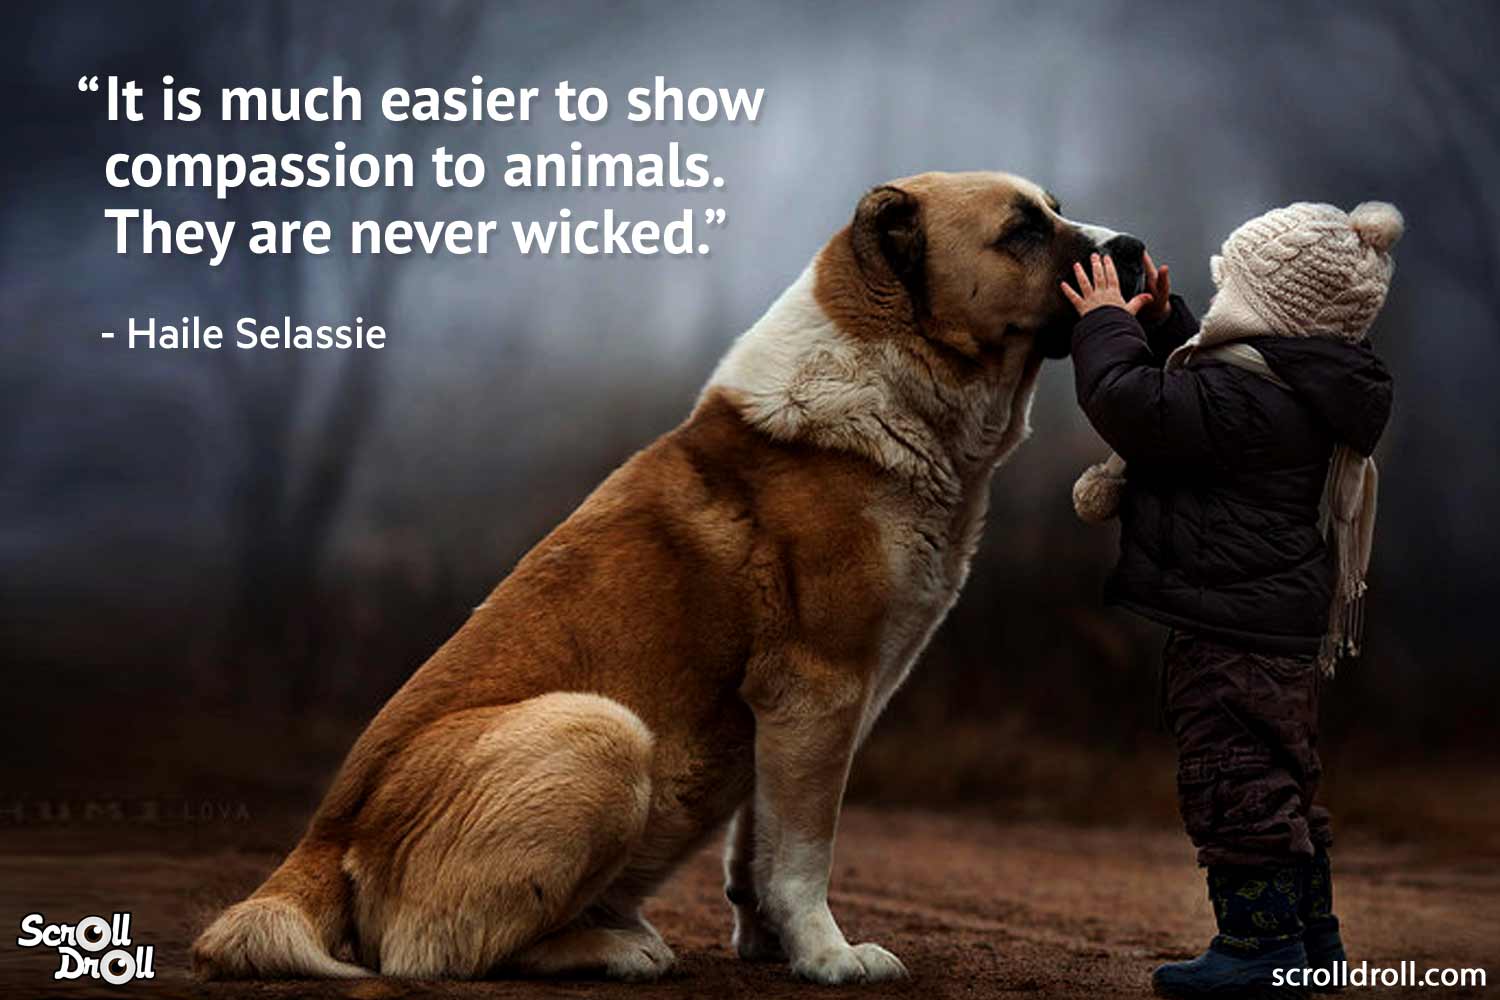 These Quotes From Famous People Will Encourage You To Love Animals